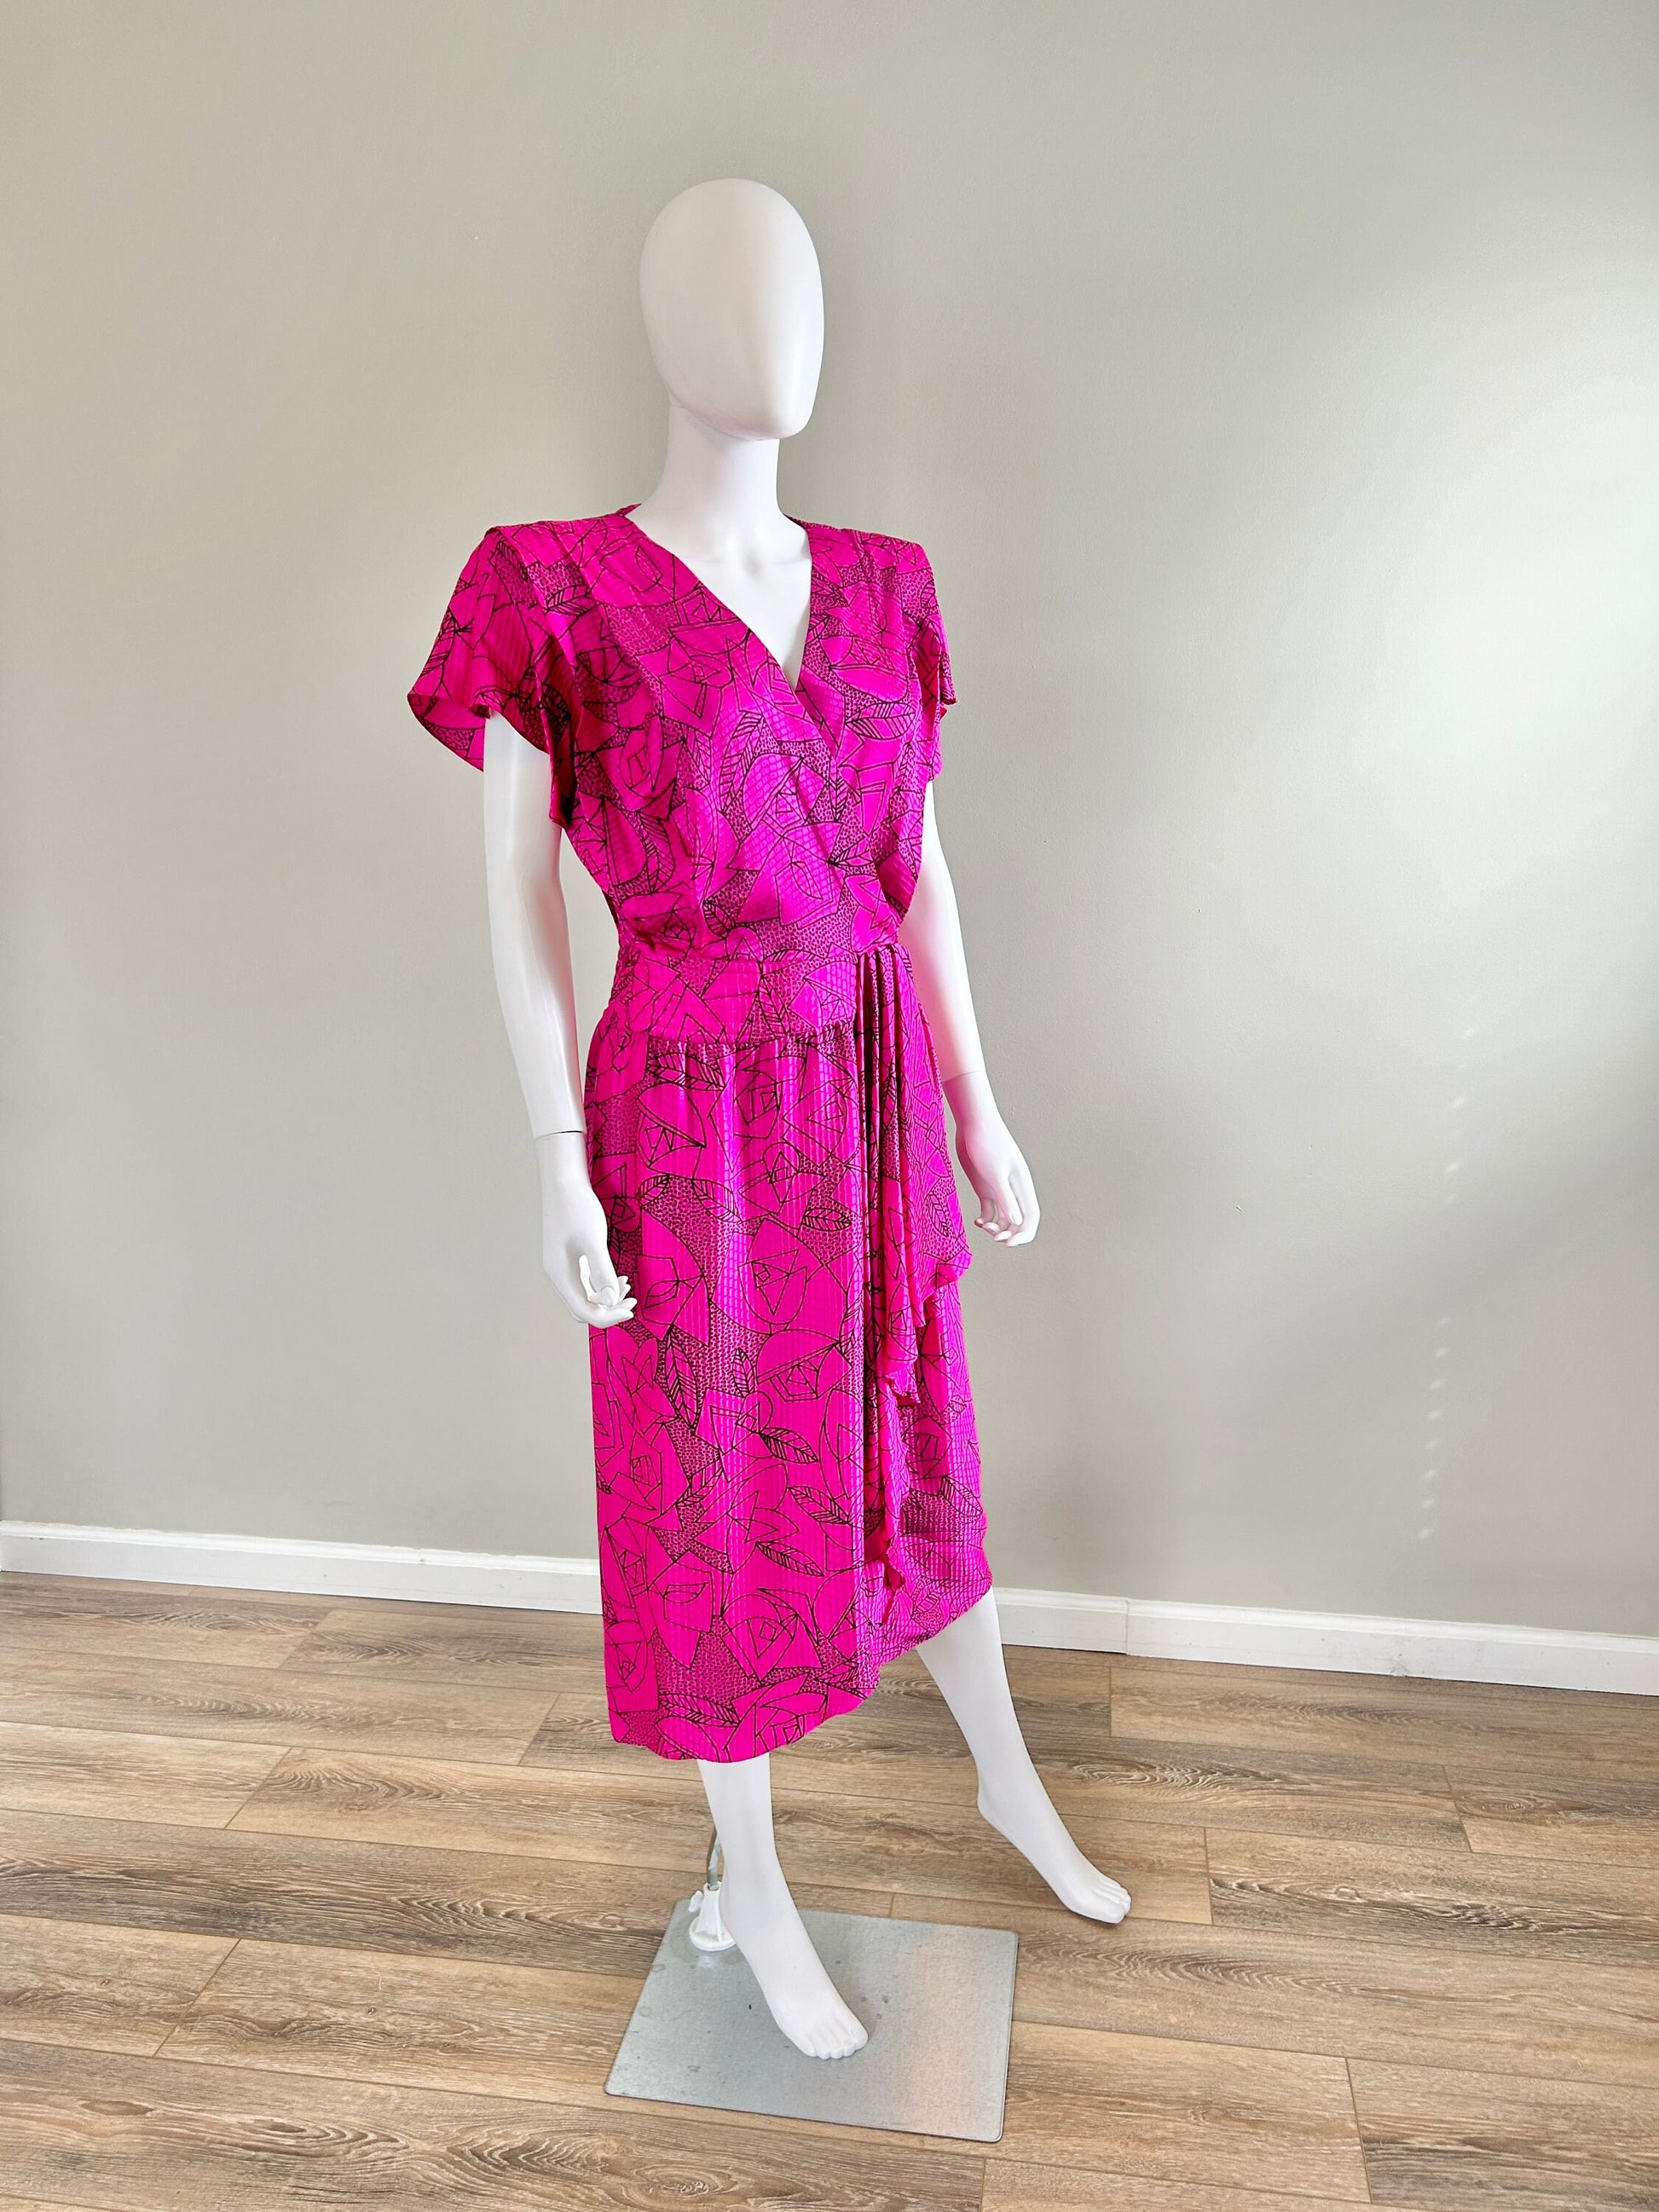 Vintage 1980s Norah Noh Wrap Dress / 80s hot pink silk abstract print dress / Size S M